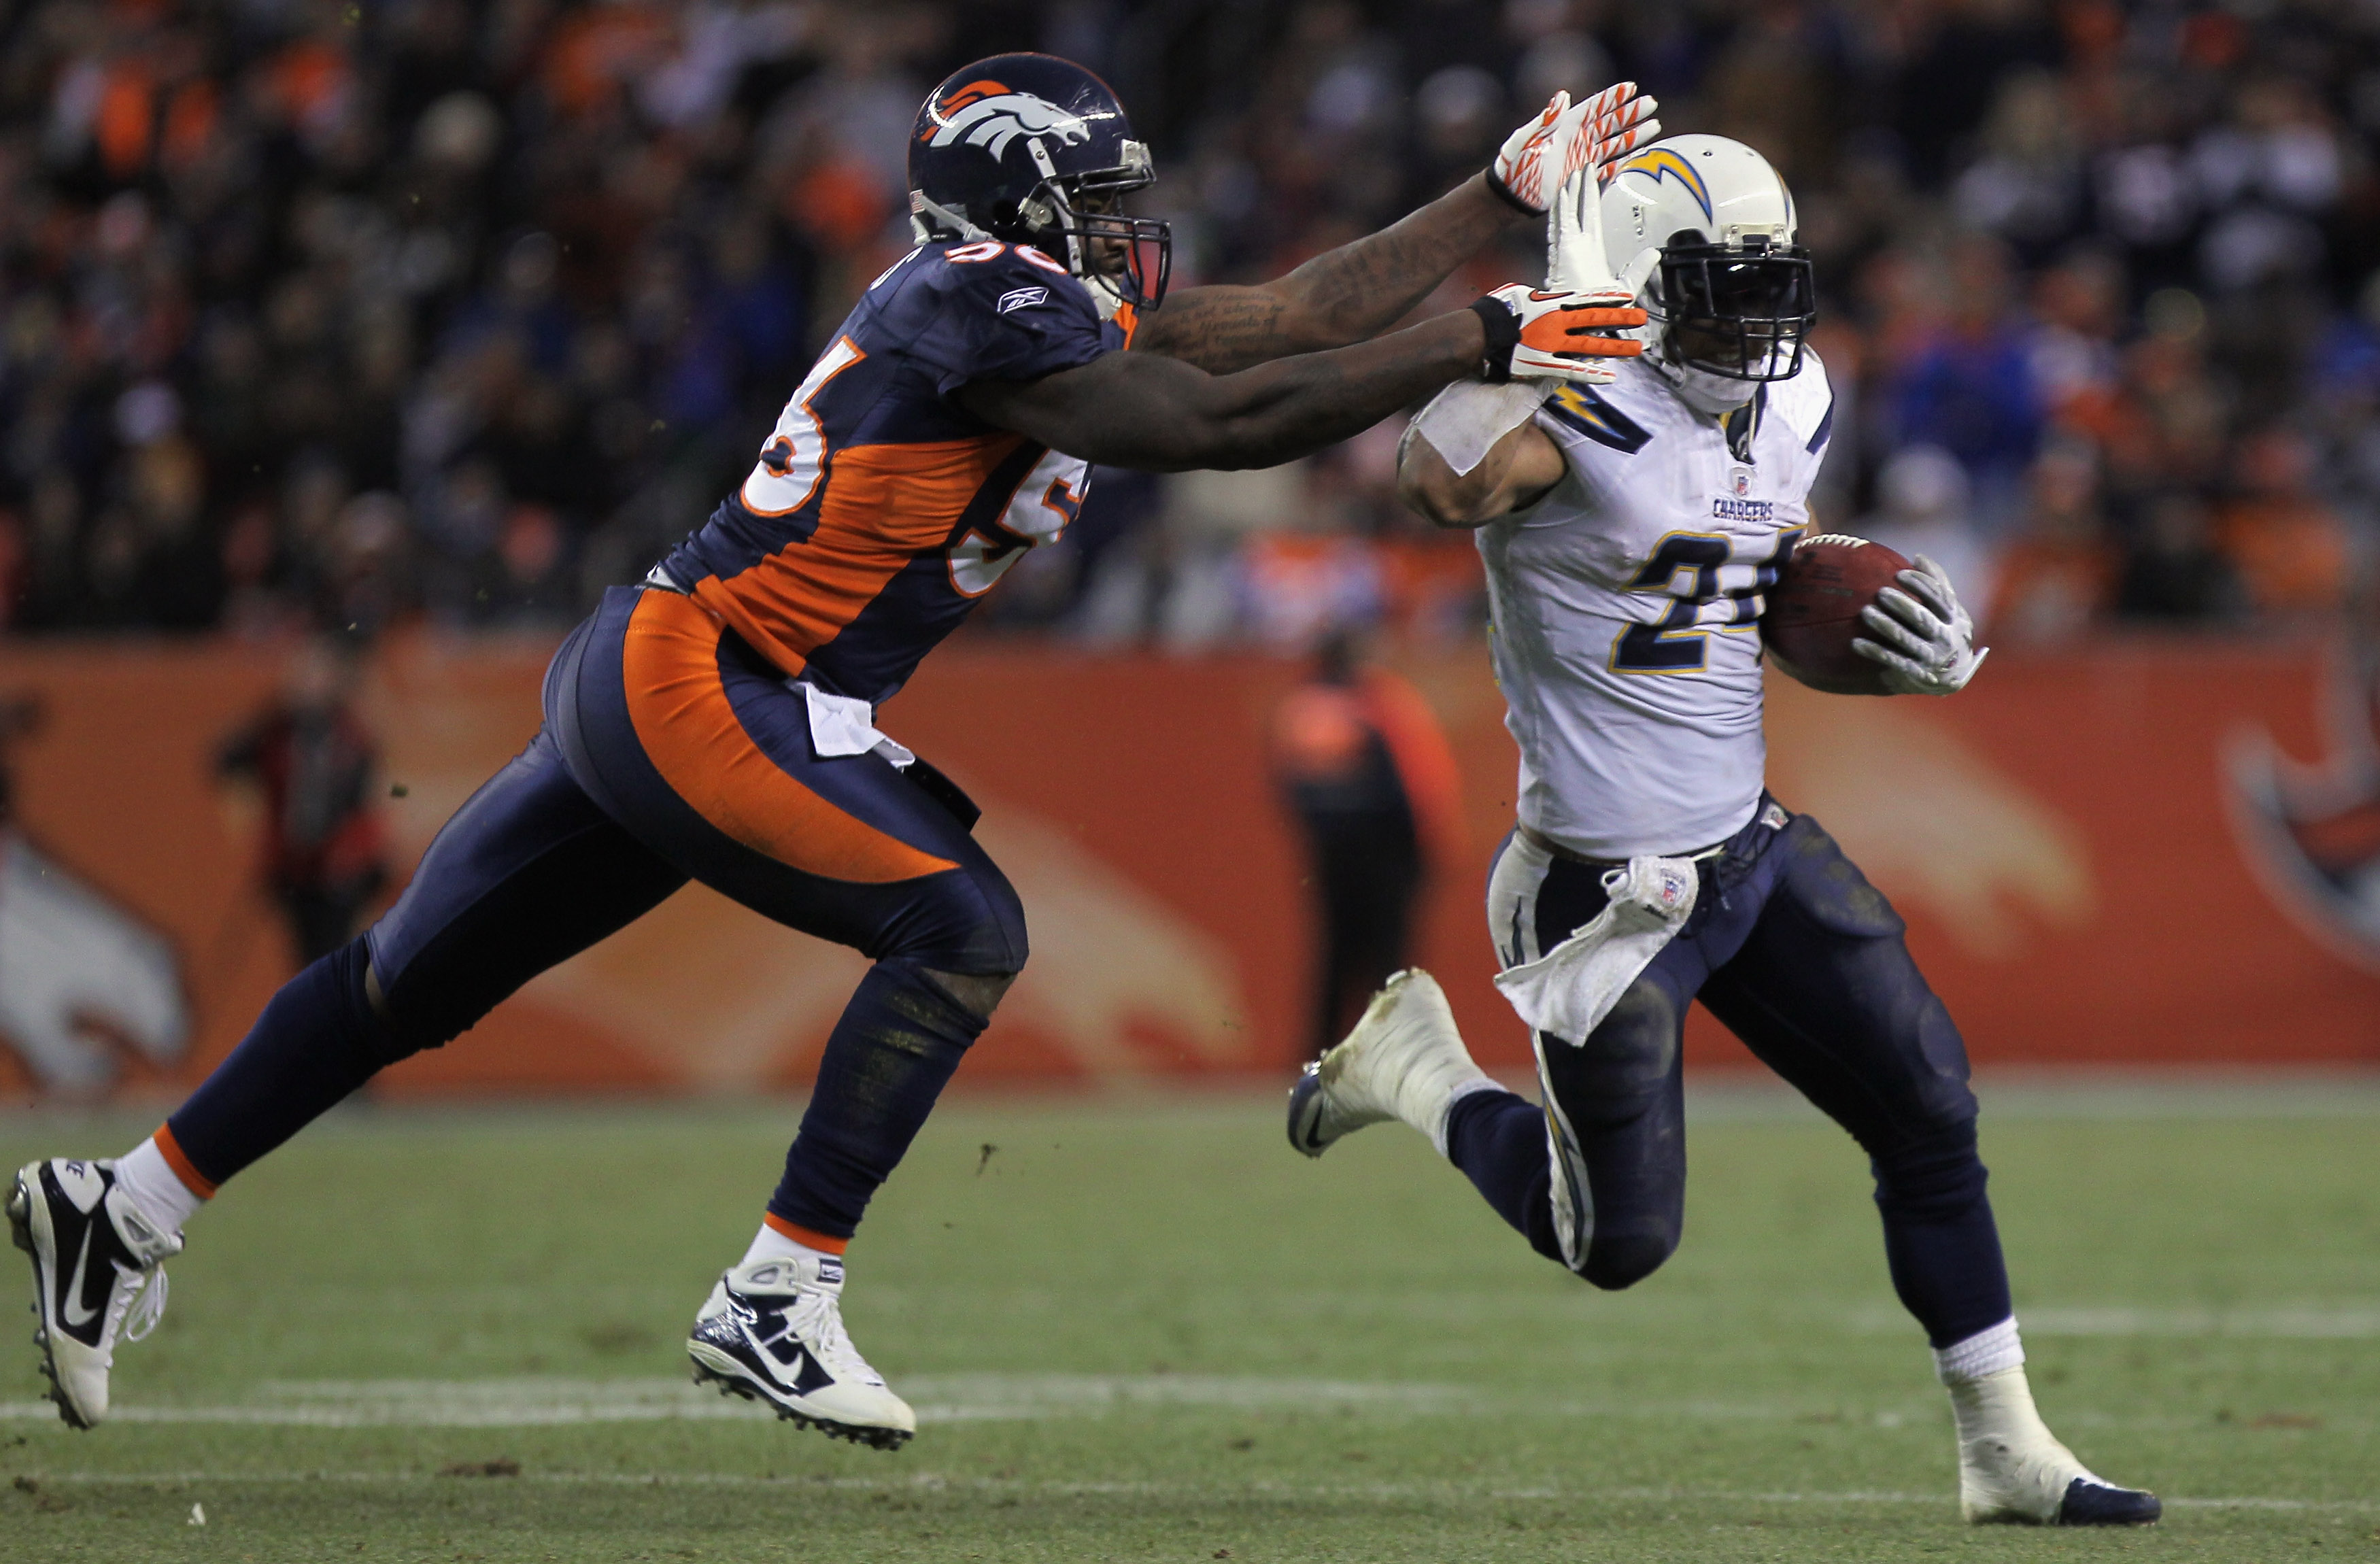 DENVER - JANUARY 02:  Running back Ryan Mathews #24 of the San Diego Chargers eludes linebacker Robert Ayers #56 of the Denver Broncos as he rushes for a 31 yard touchdown on fourth down and one yard to go in the fourth quarter at INVESCO Field at Mile Hi